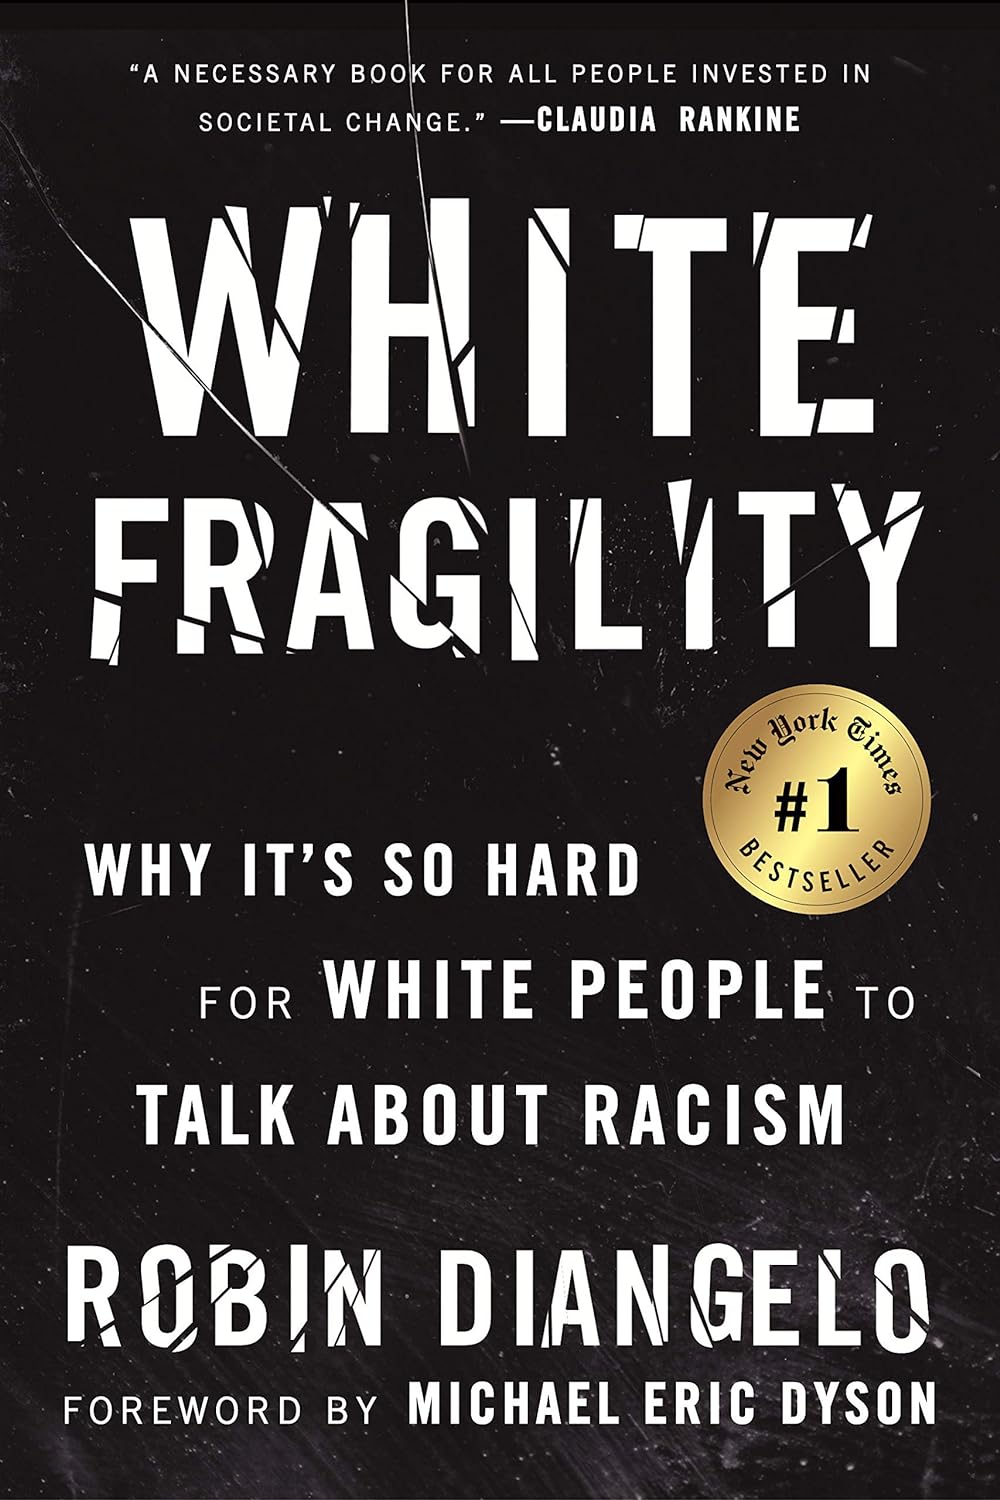 White Fragility: Why It's So Hard for White People to Talk About Racism - Dr. Robin DiAngelo